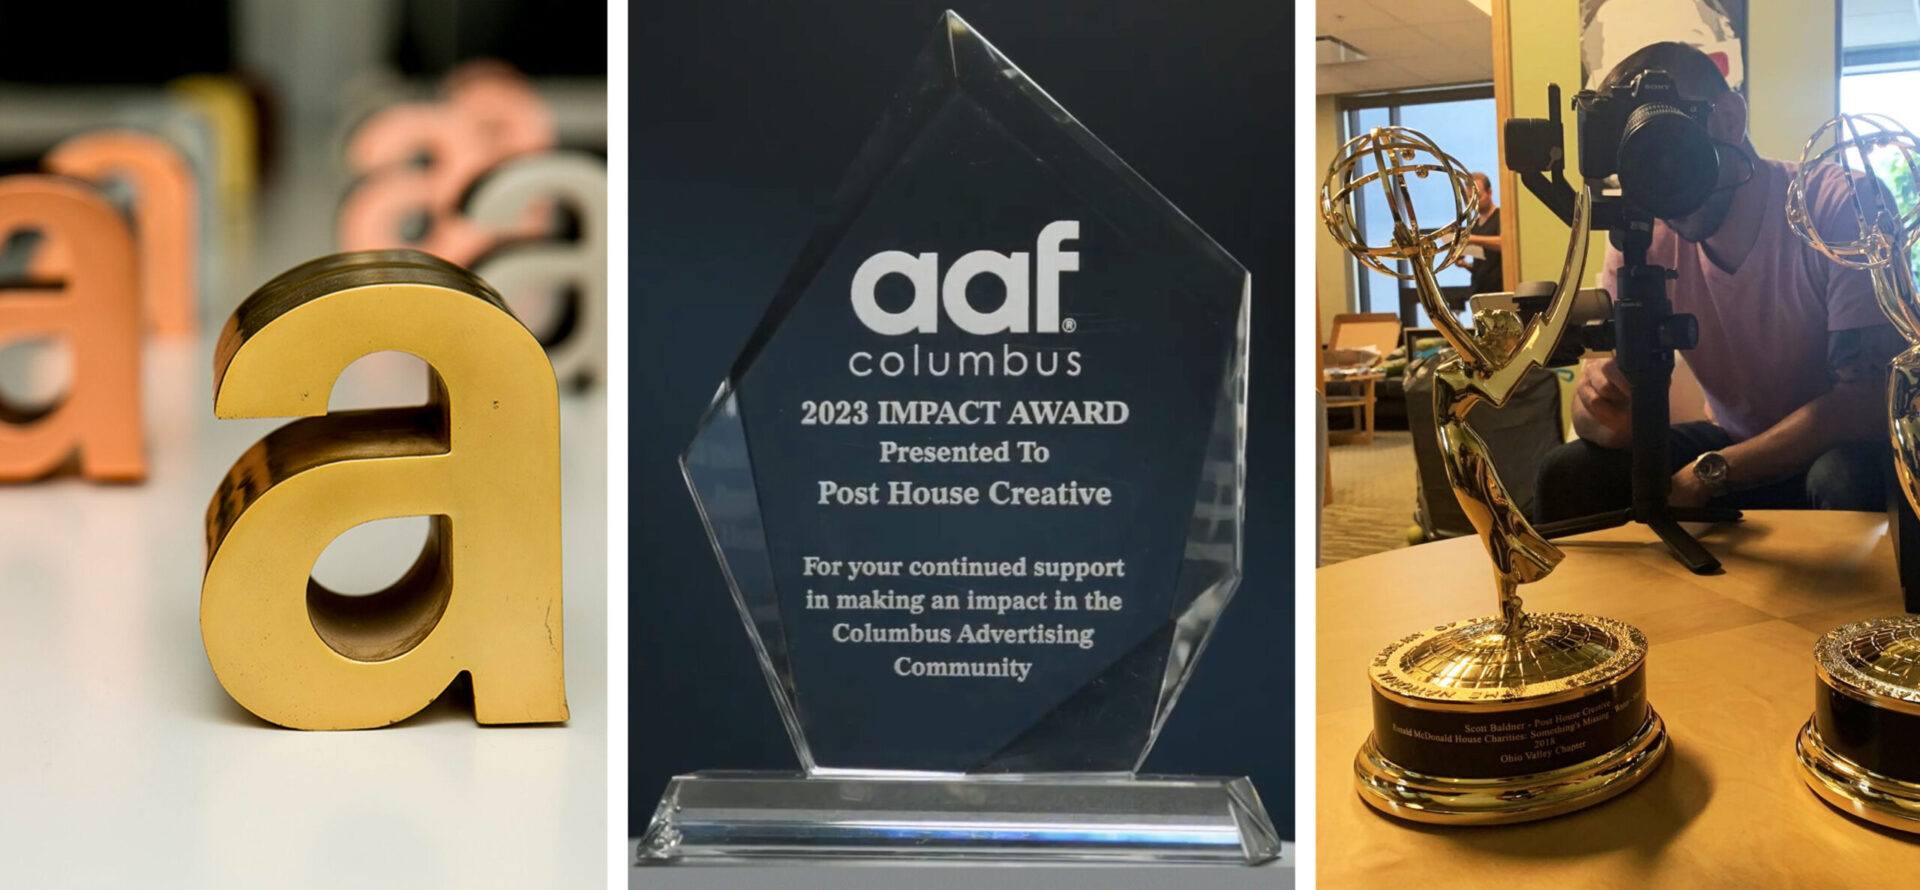 Images showcasing an ADDY award, the 2023 Impact Award and Emmy Awards that Post House Creative won over several years